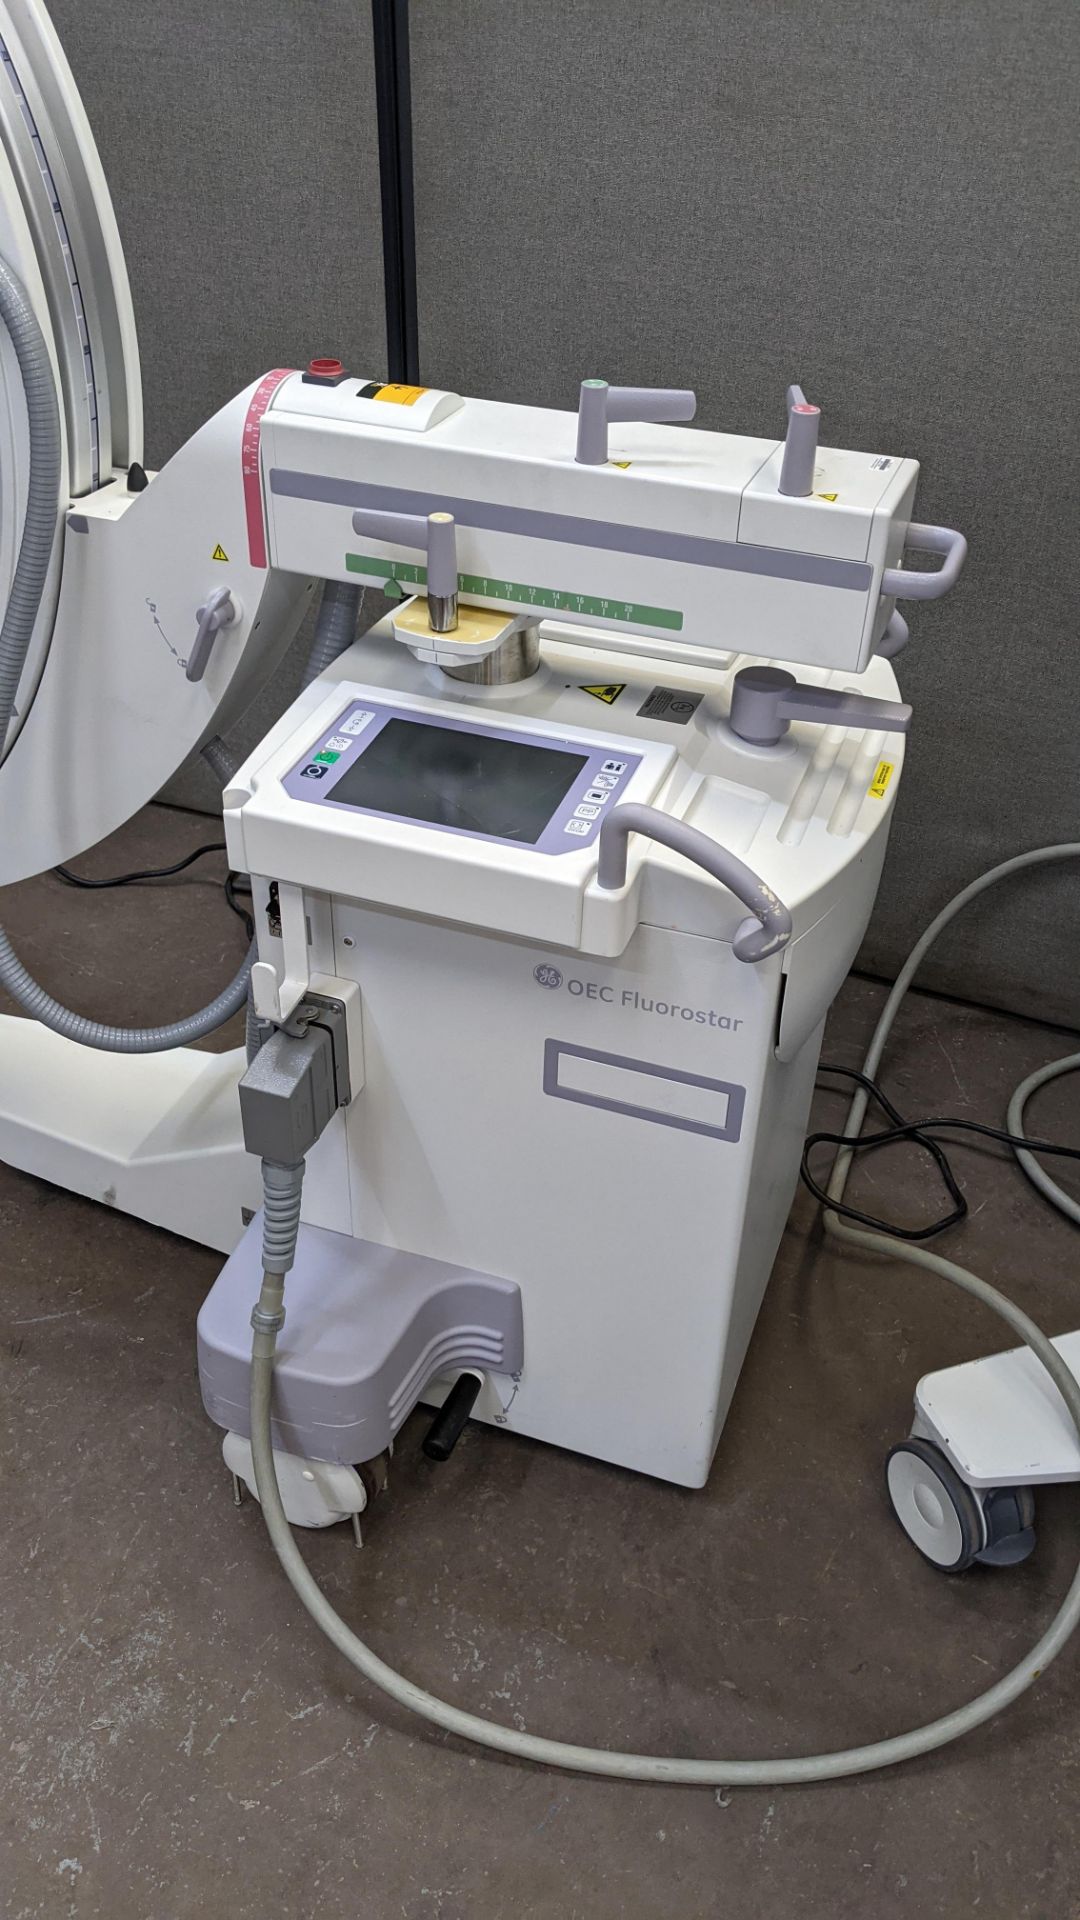 GE-OEC Fluorostar imaging system, purchased new in August 2017. EO4 Series. - Image 36 of 68